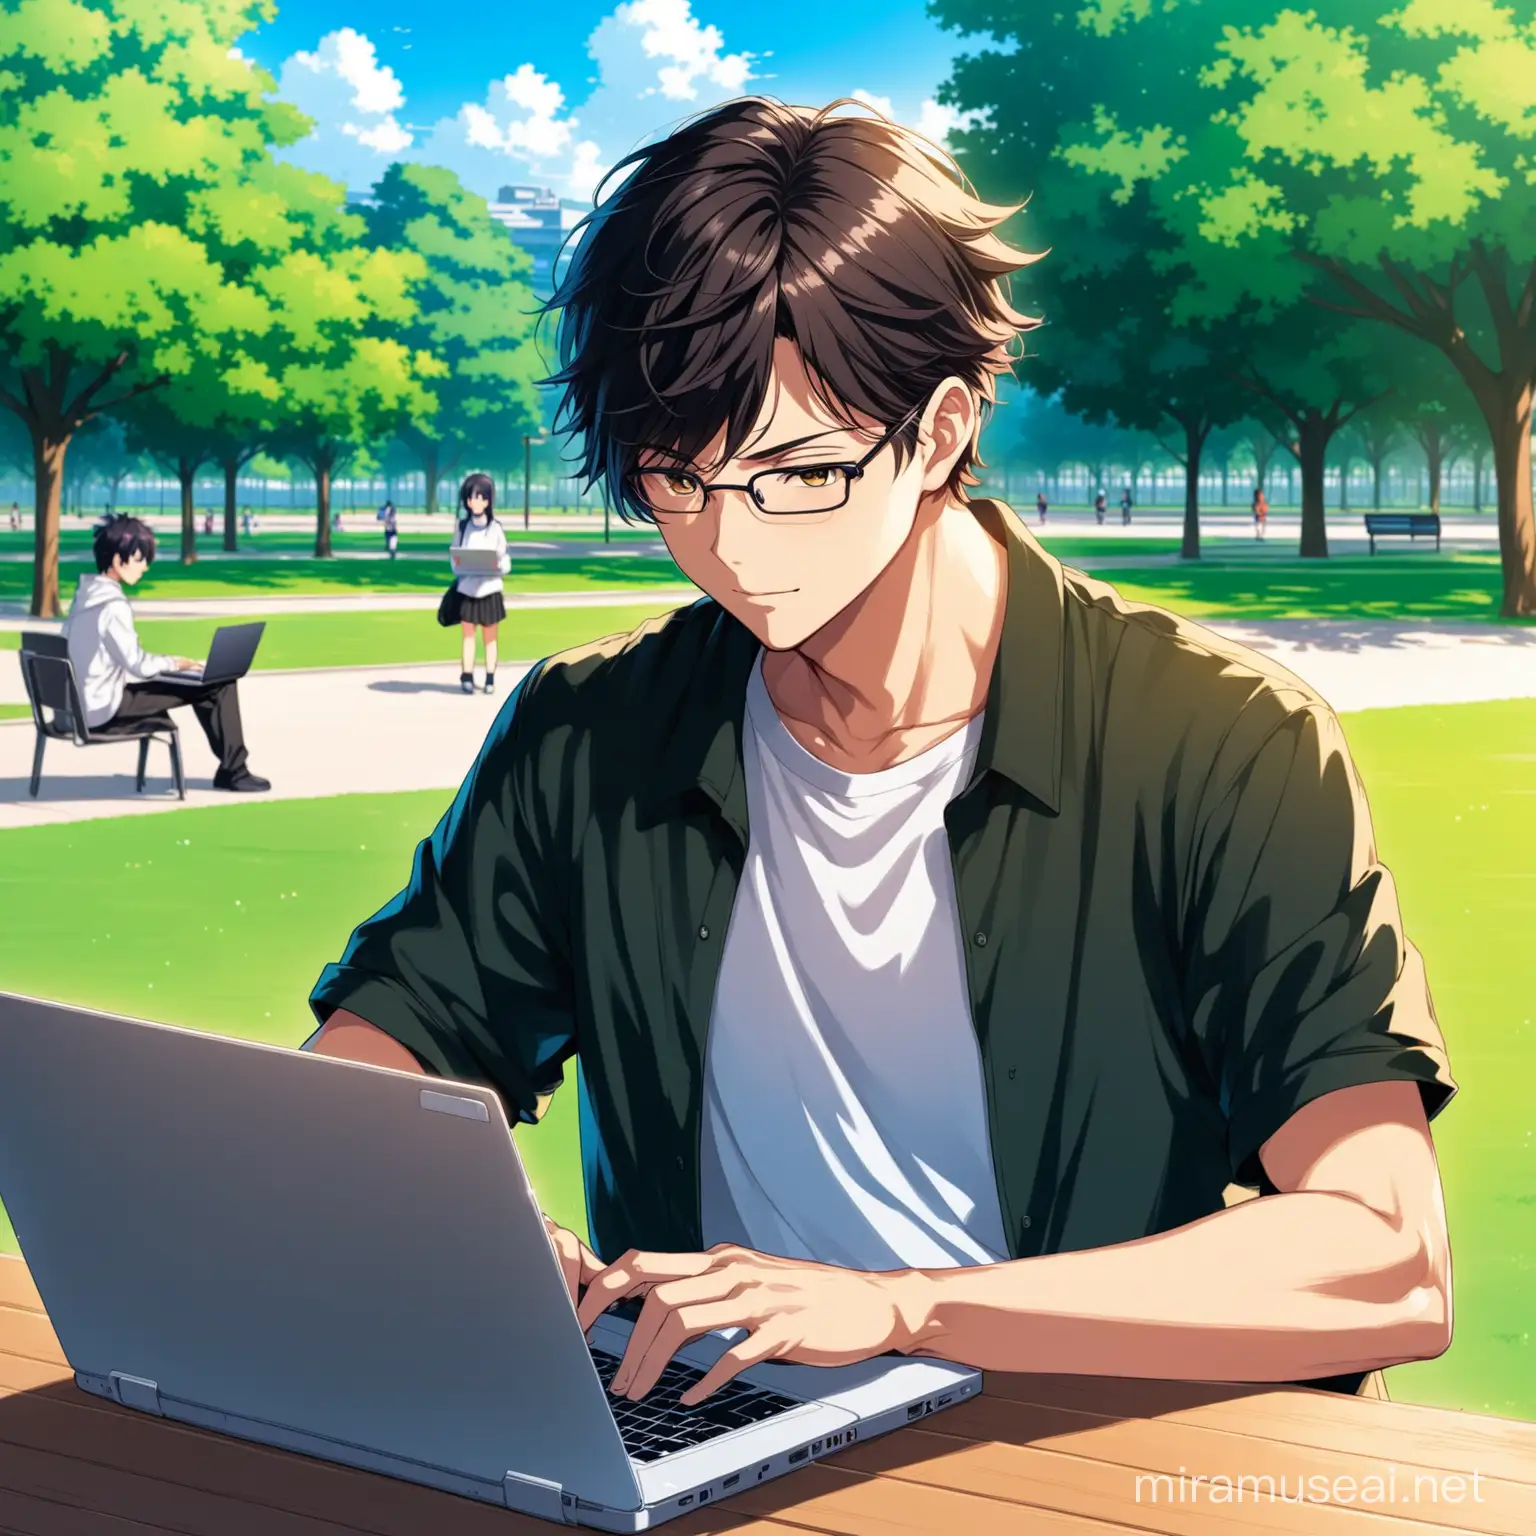 anime student with a laptop with park in background.
a guy looking at his laptop working
